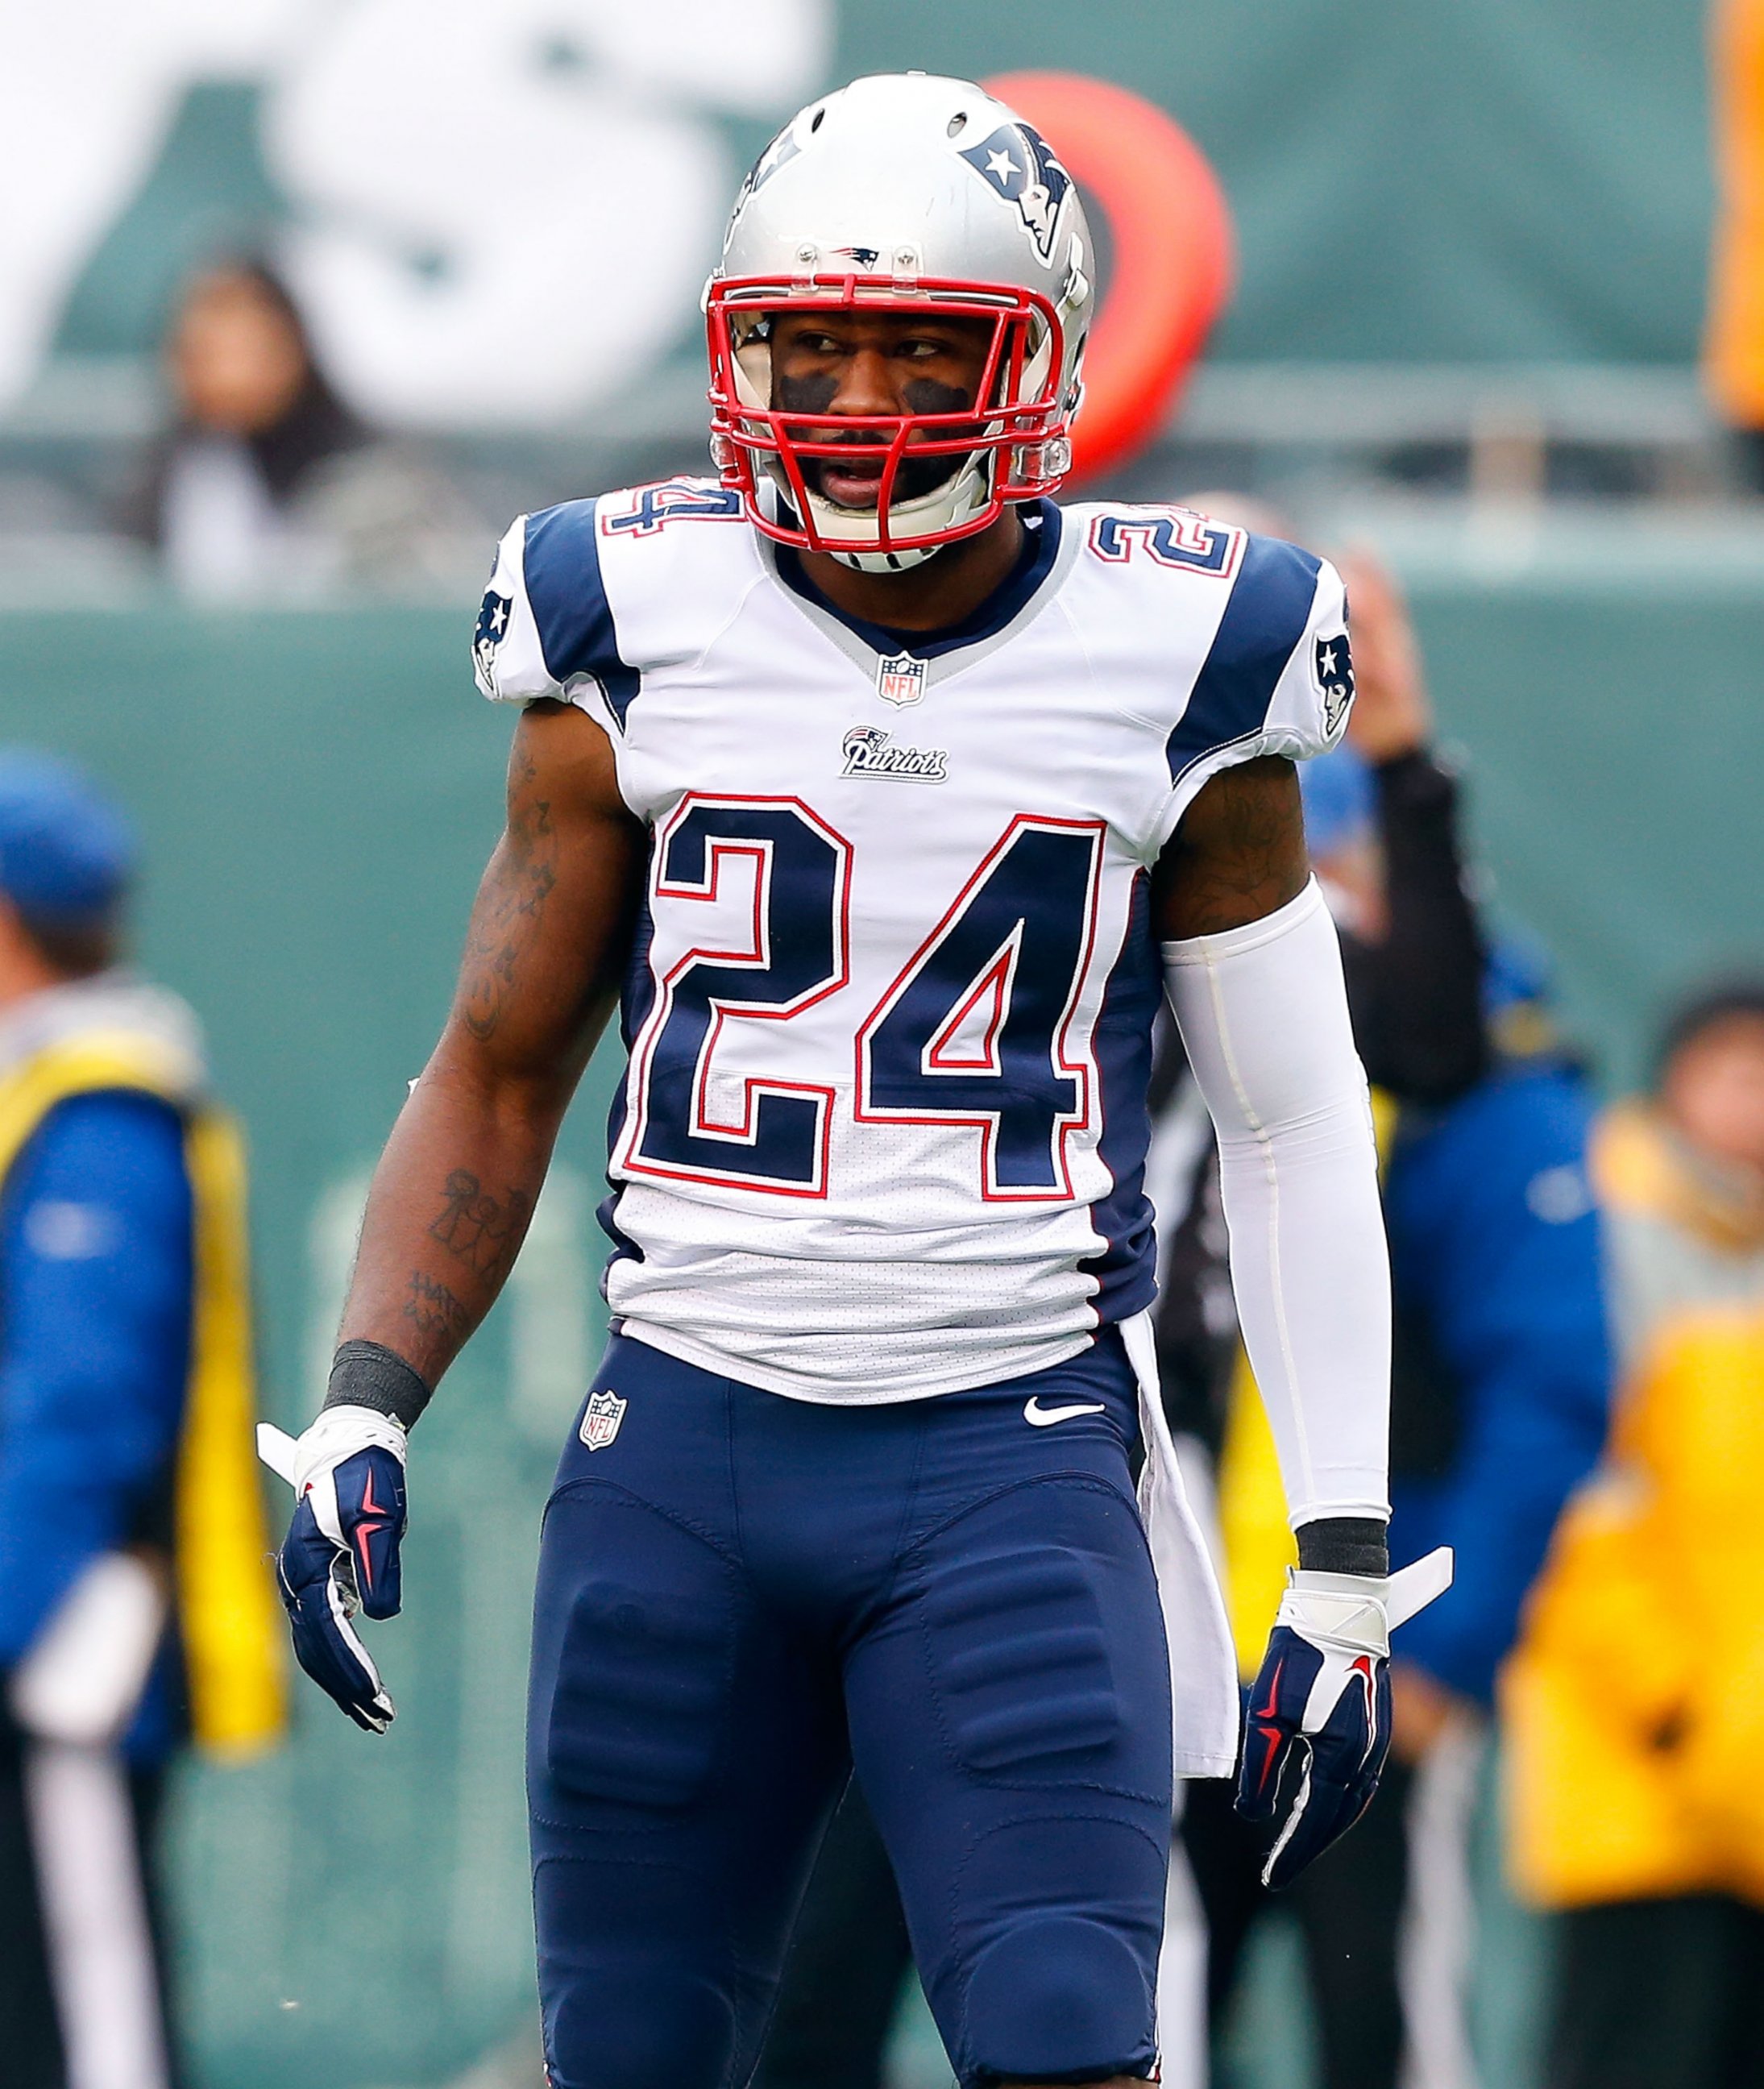 PHOTO: Darrelle Revis of the New England Patriots is seen here Dec. 21, 2014 at MetLife Stadium in East Rutherford, N.J.